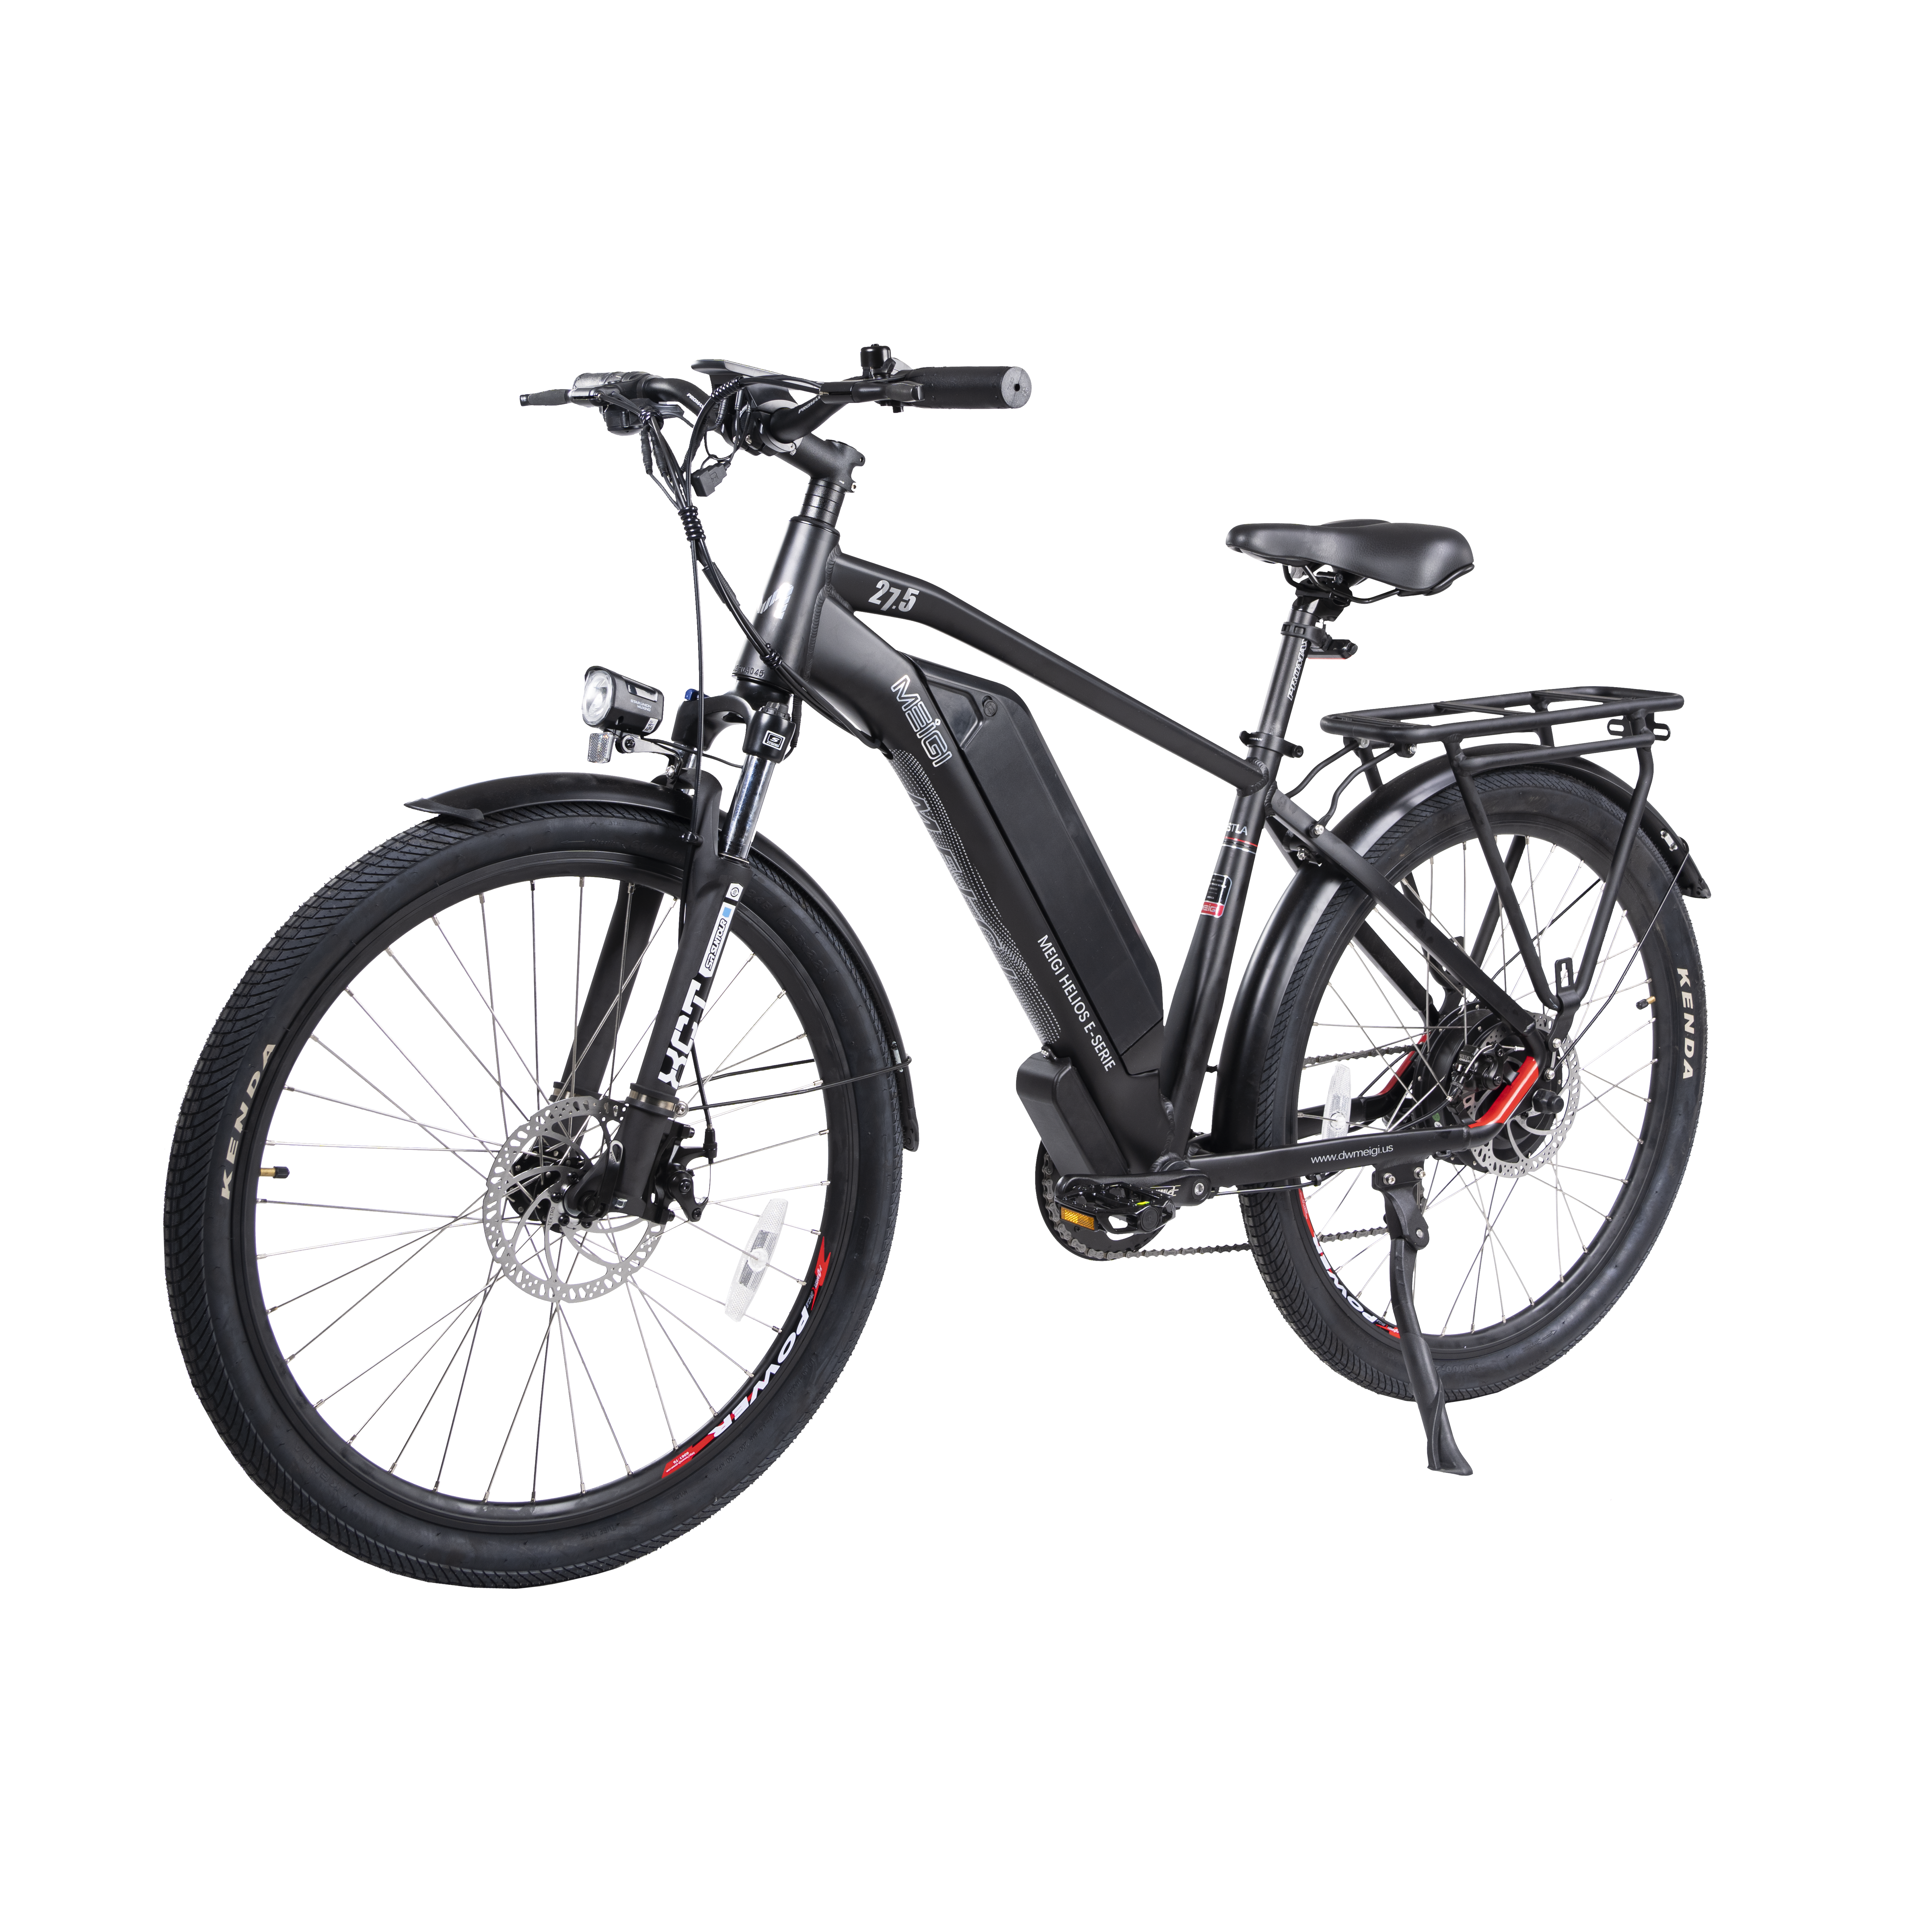 MEIGI Hot Sales USA Electric Bike Big Power 750W Motor City Electric Bicycle 27.5'' Ebike With Free Shipping For Adults